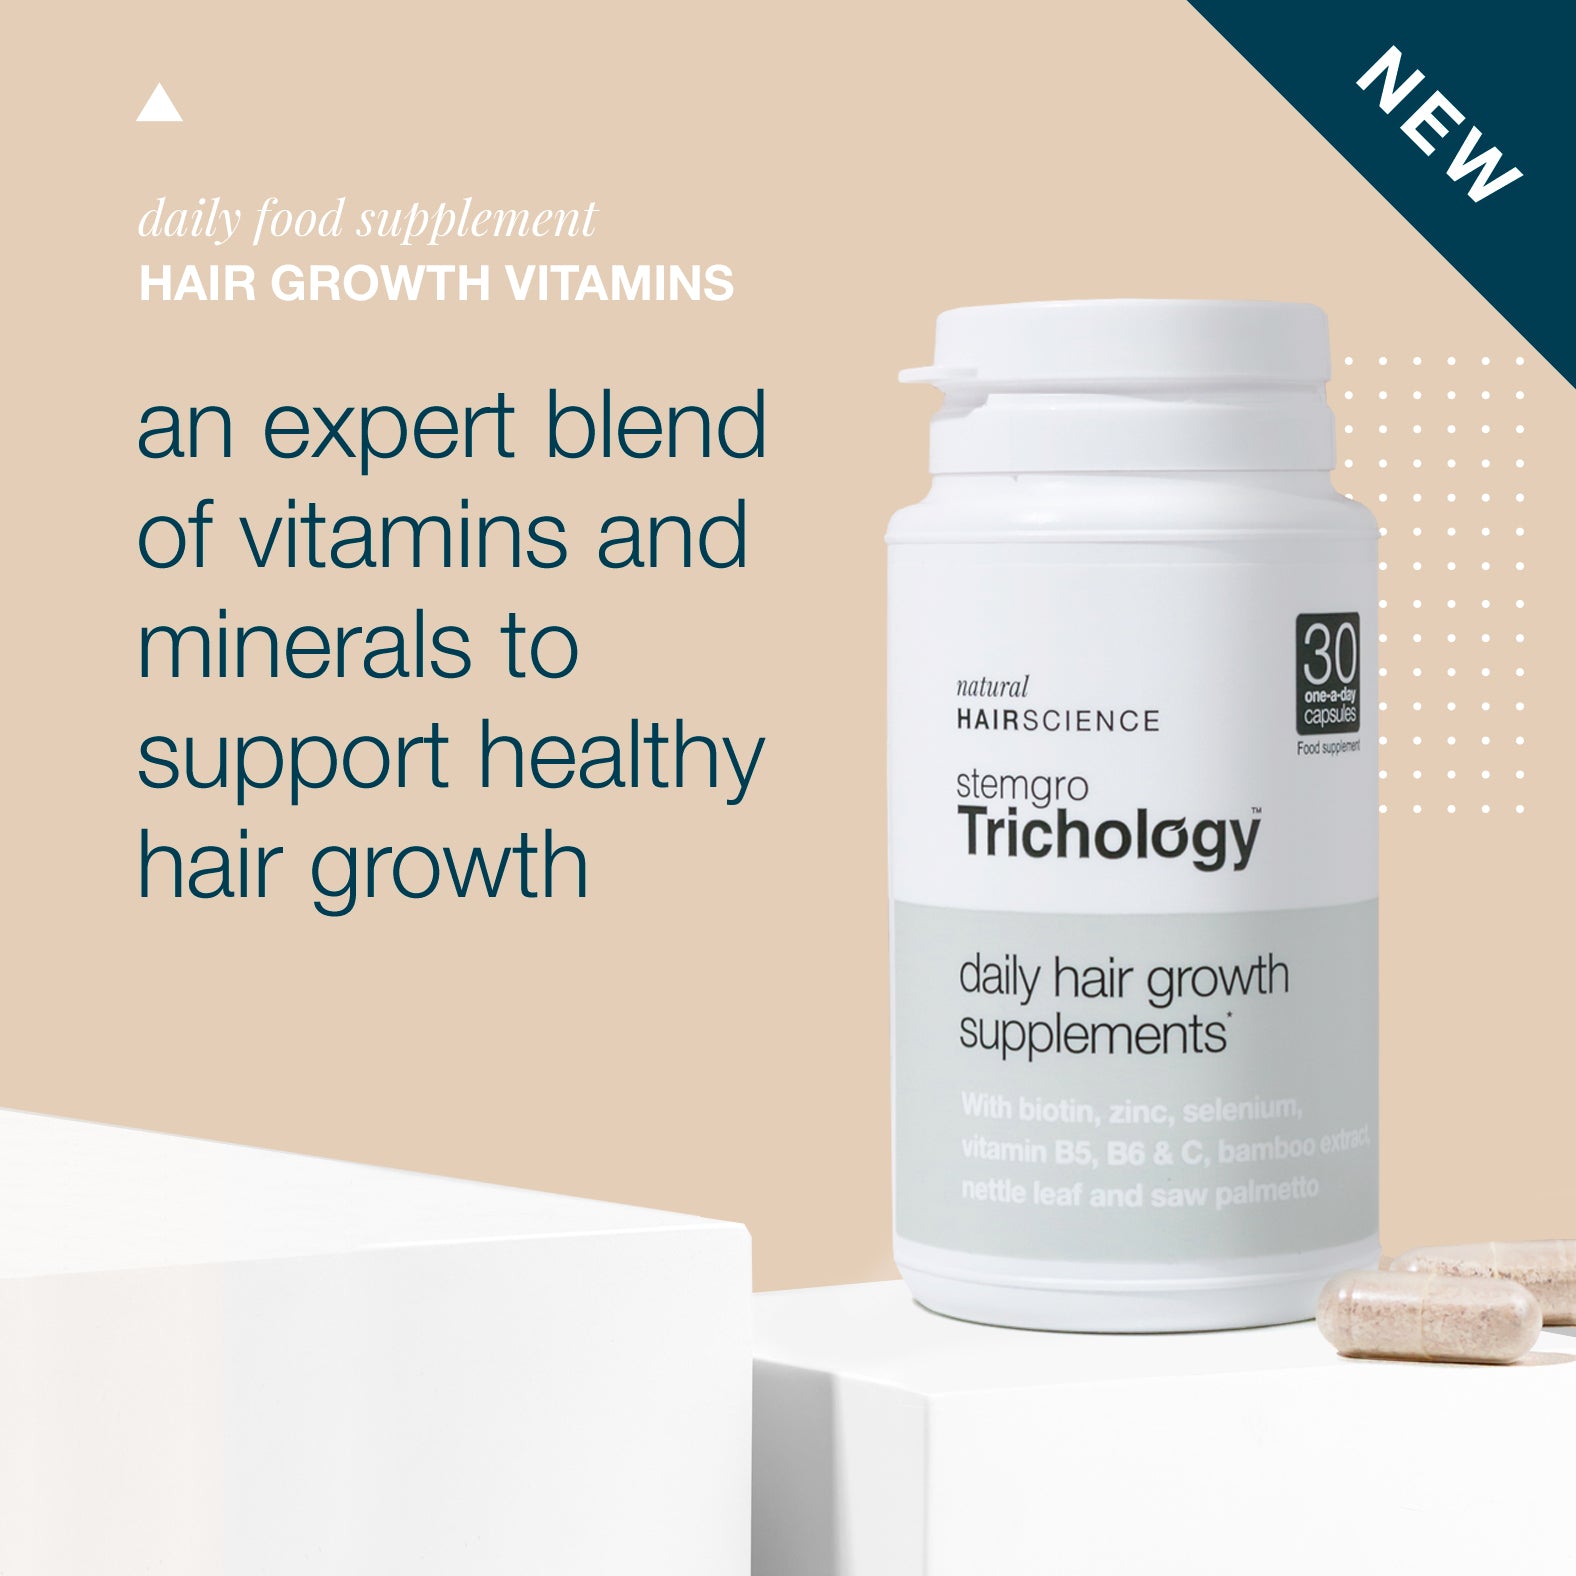 Stemgro Trichology Daily Hair Growth Supplements